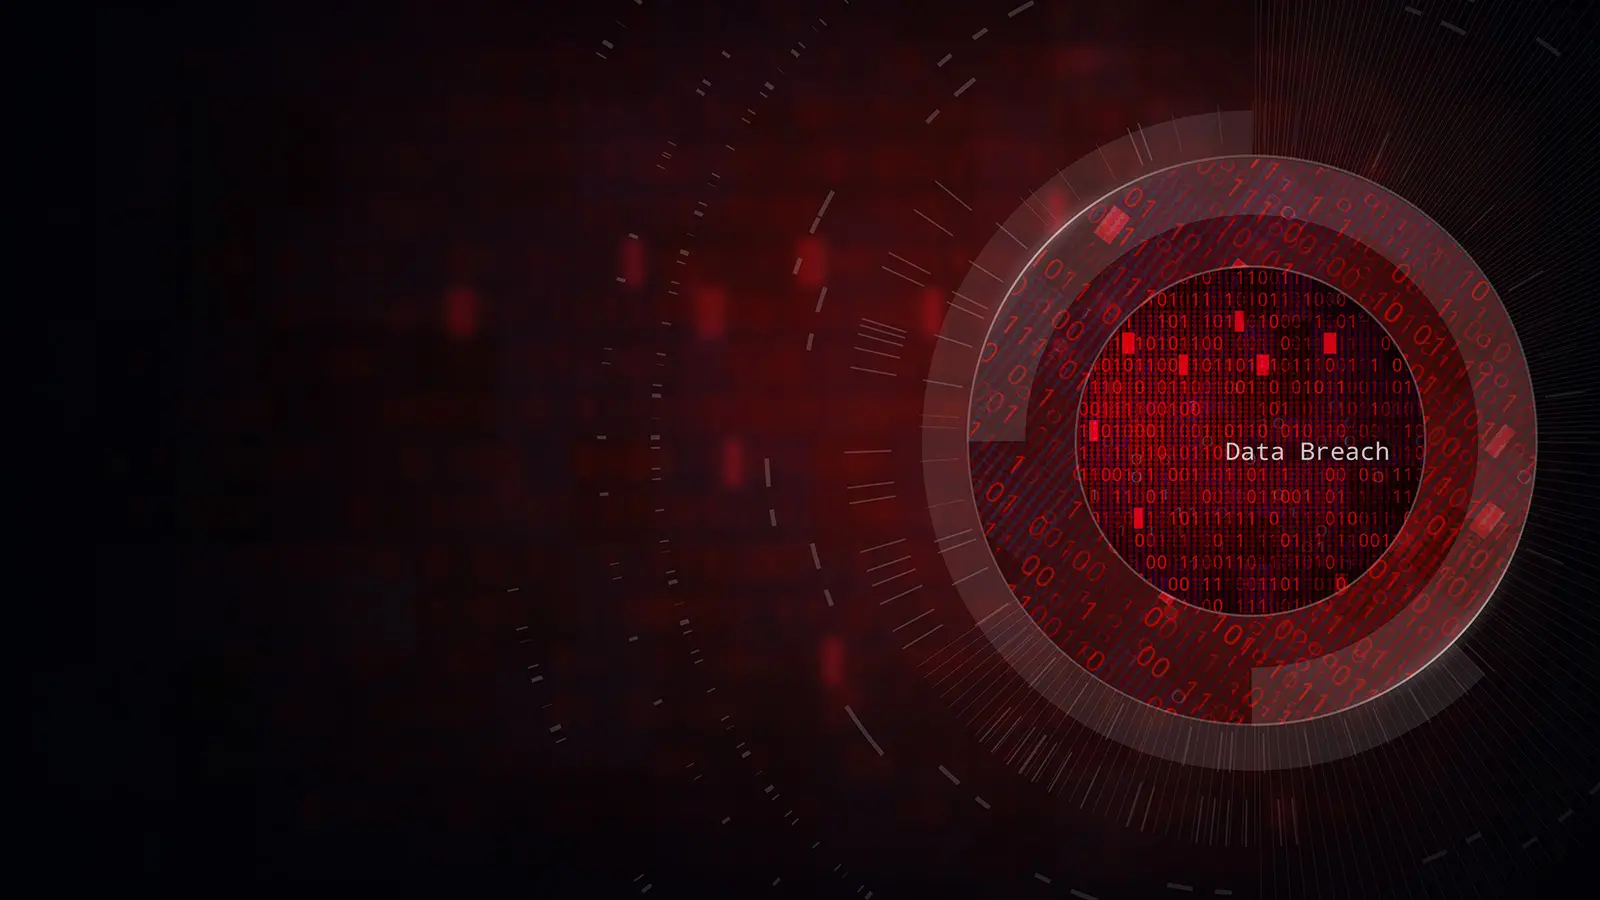 Dark red abstract background with a circle filled with 0s and 1s and "Data Breach" in white